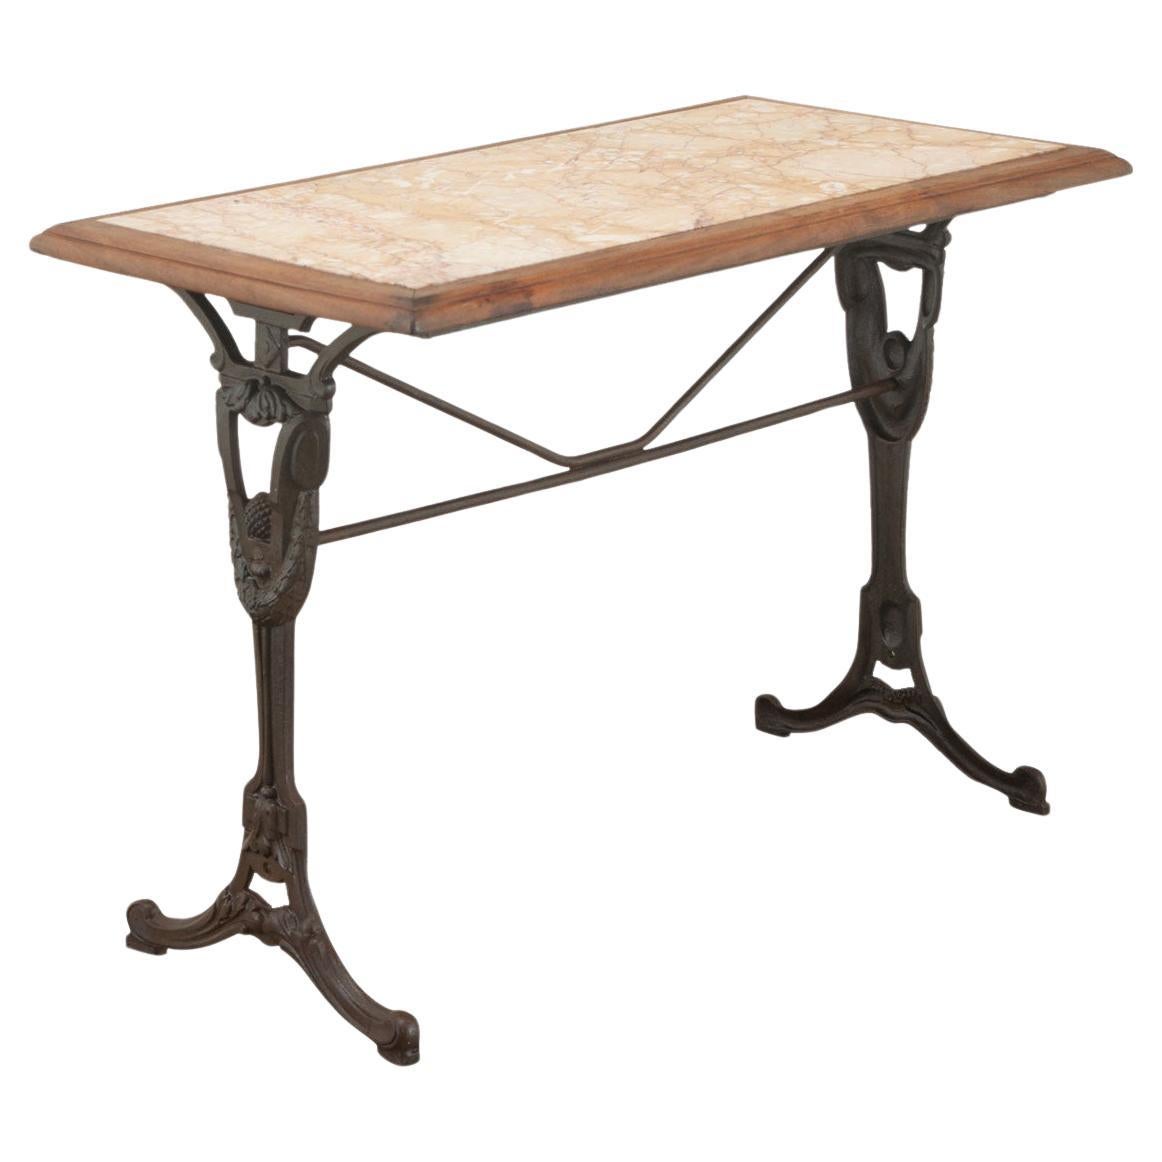 What is the difference between a bistro table and a pub table?